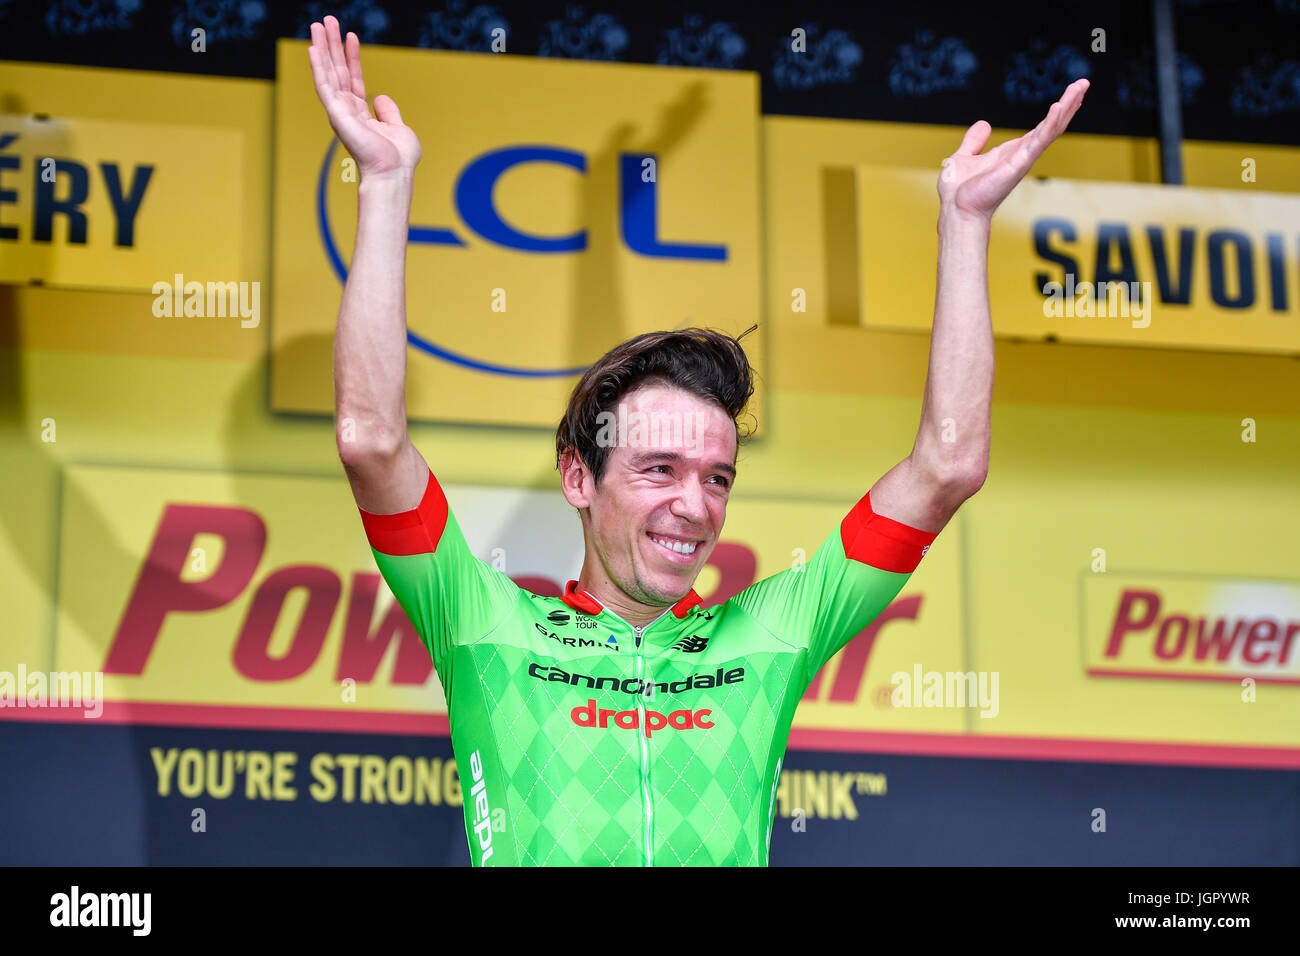 Chambery, France. 9th July, 2017. Colombian rider Rigoberto Uran from Cannonade Drapac Professional Cycling Team attends the awarding ceremony for the stage winner in Chambery, France, on July 9, 2017. The 181.5 kilometers 9th stage of the Tour de France from Nantua to Chambery ended on Sunday. Credit: Chen Yichen/Xinhua/Alamy Live News Stock Photo